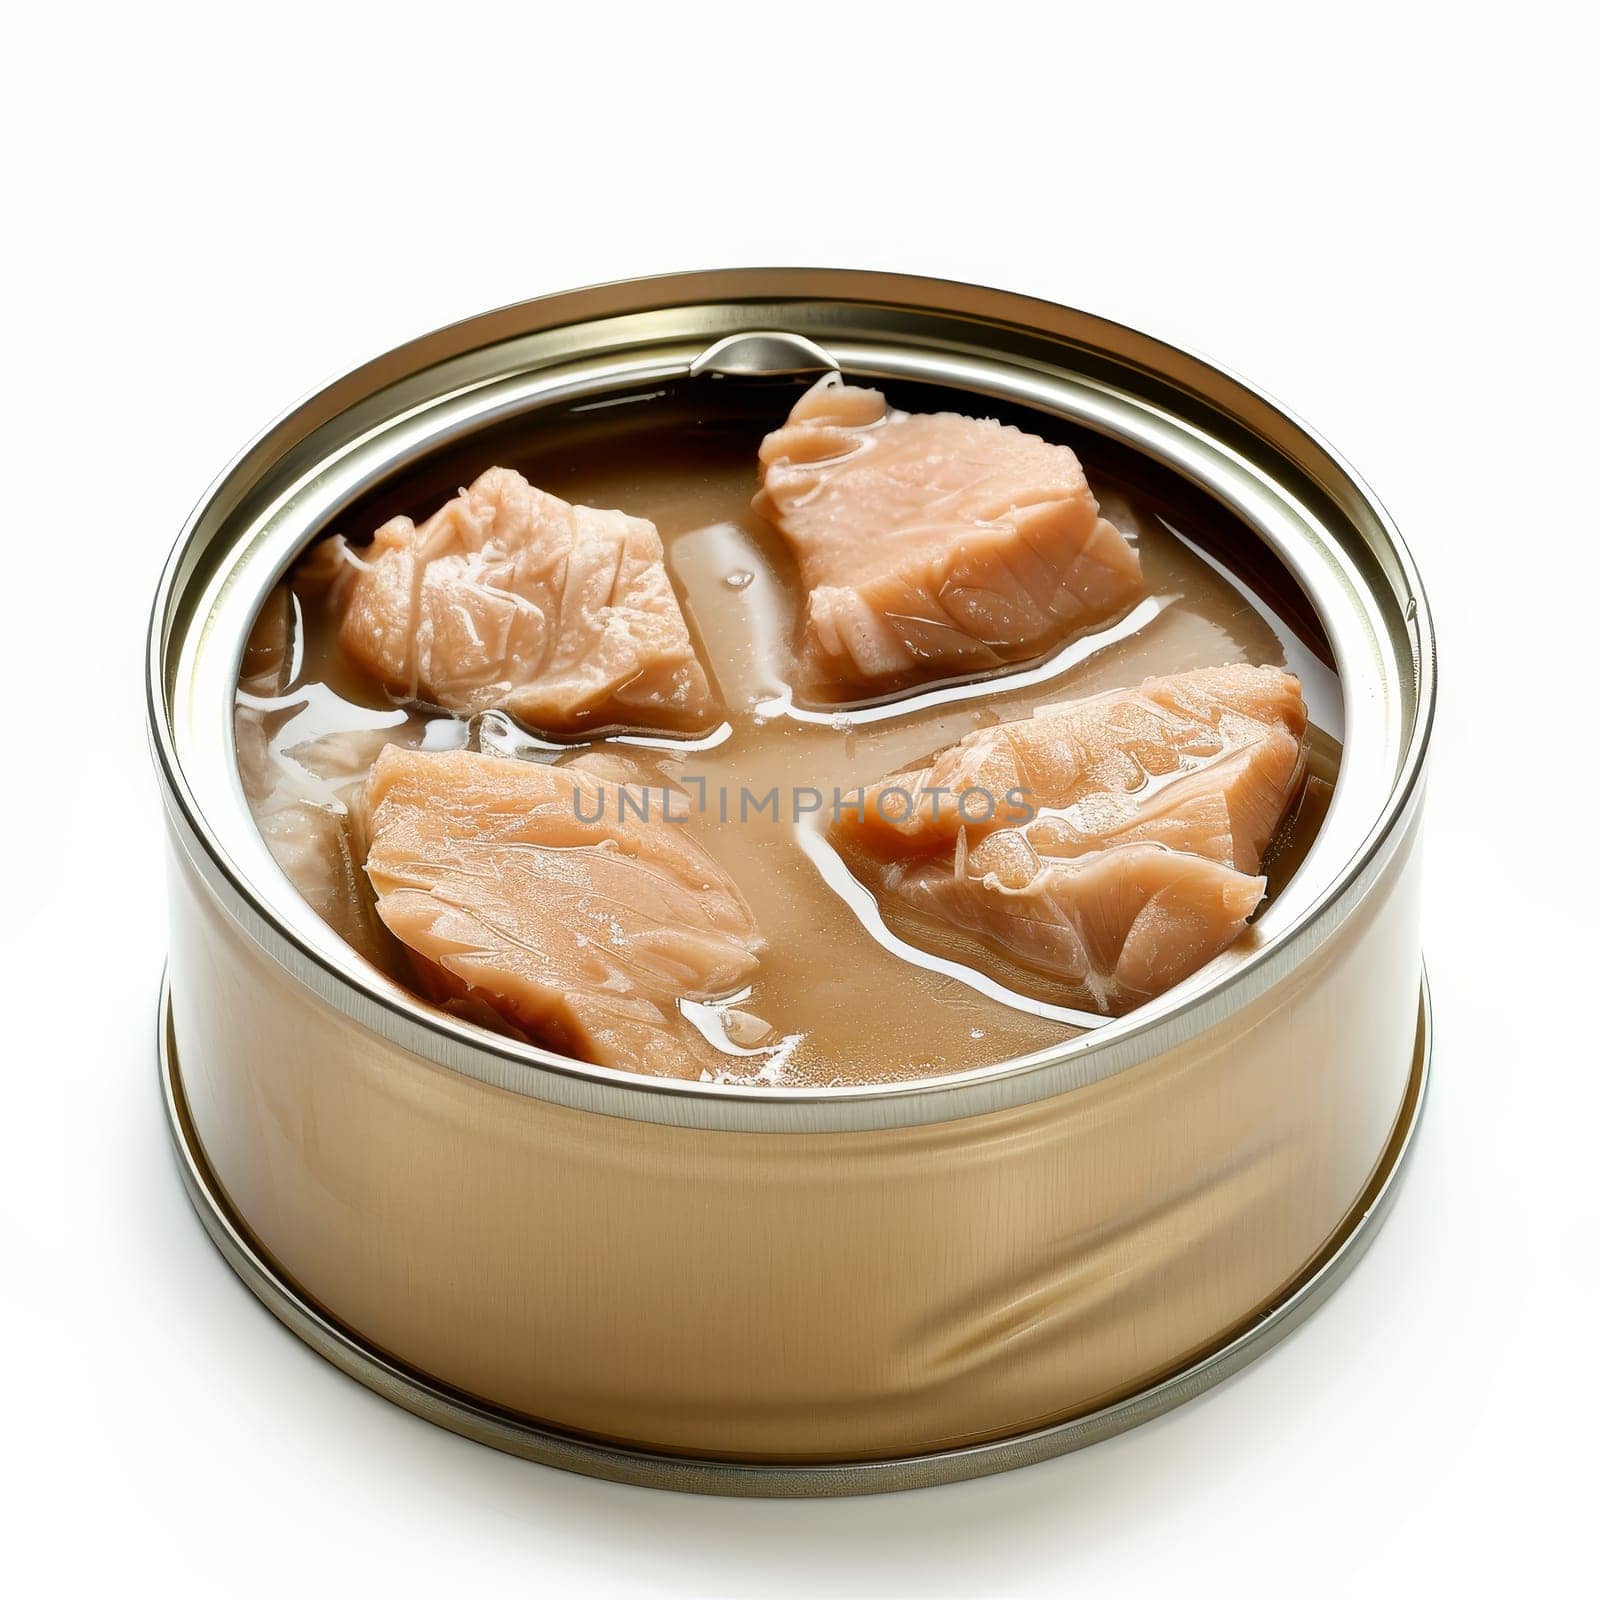 Open can displaying neatly packed slices of tuna submerged in oil, shot on a white background.